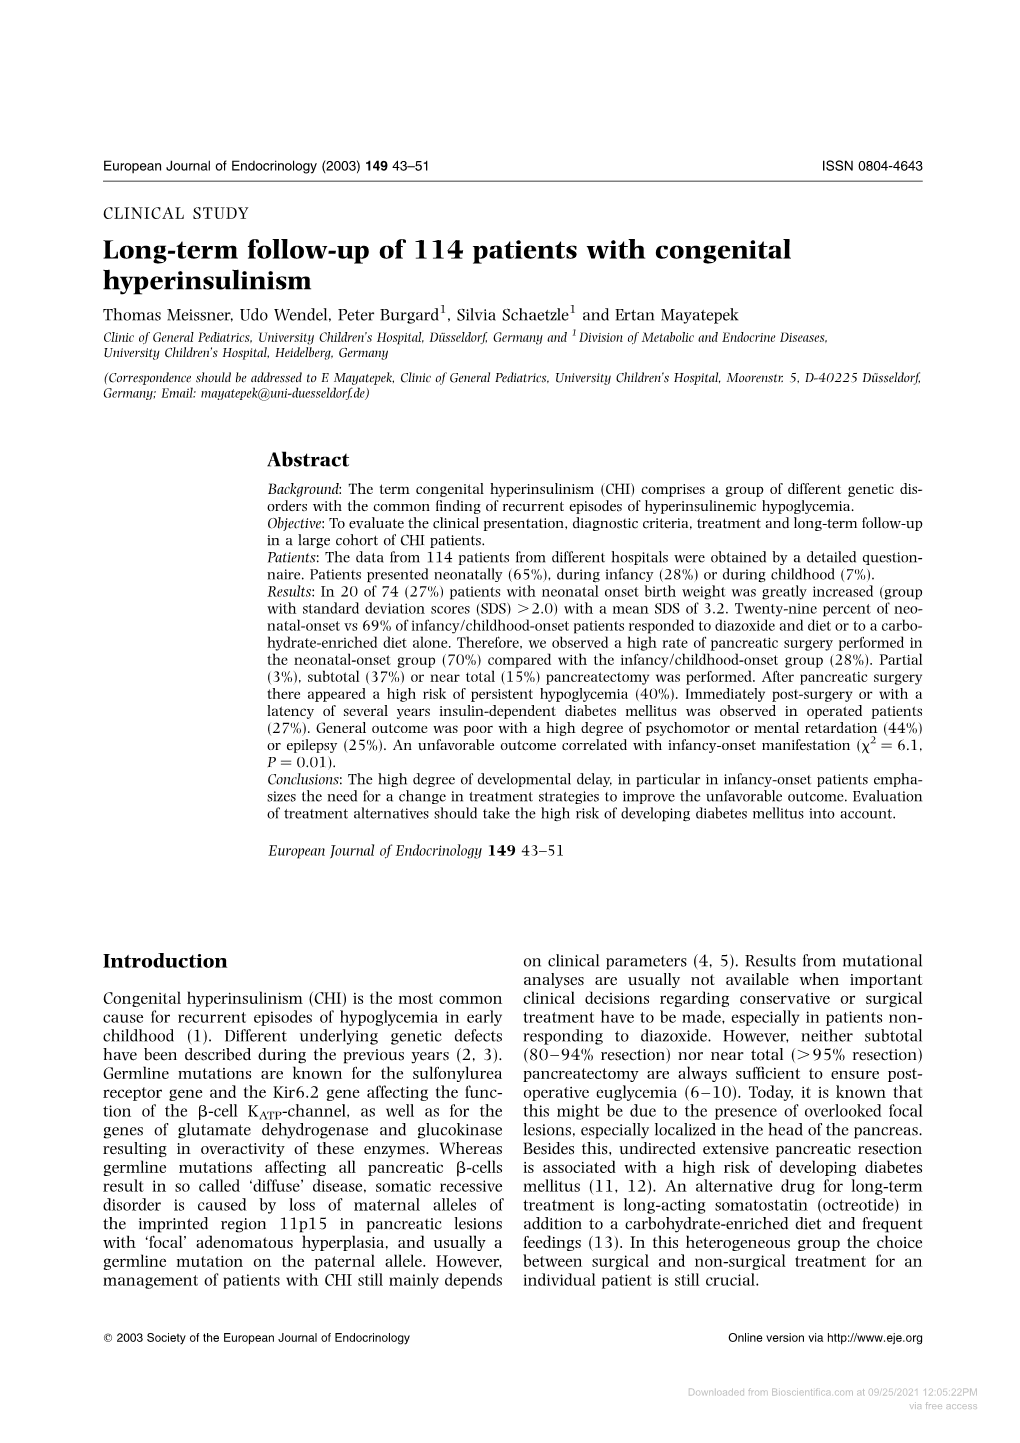 Long-Term Follow-Up of 114 Patients with Congenital Hyperinsulinism